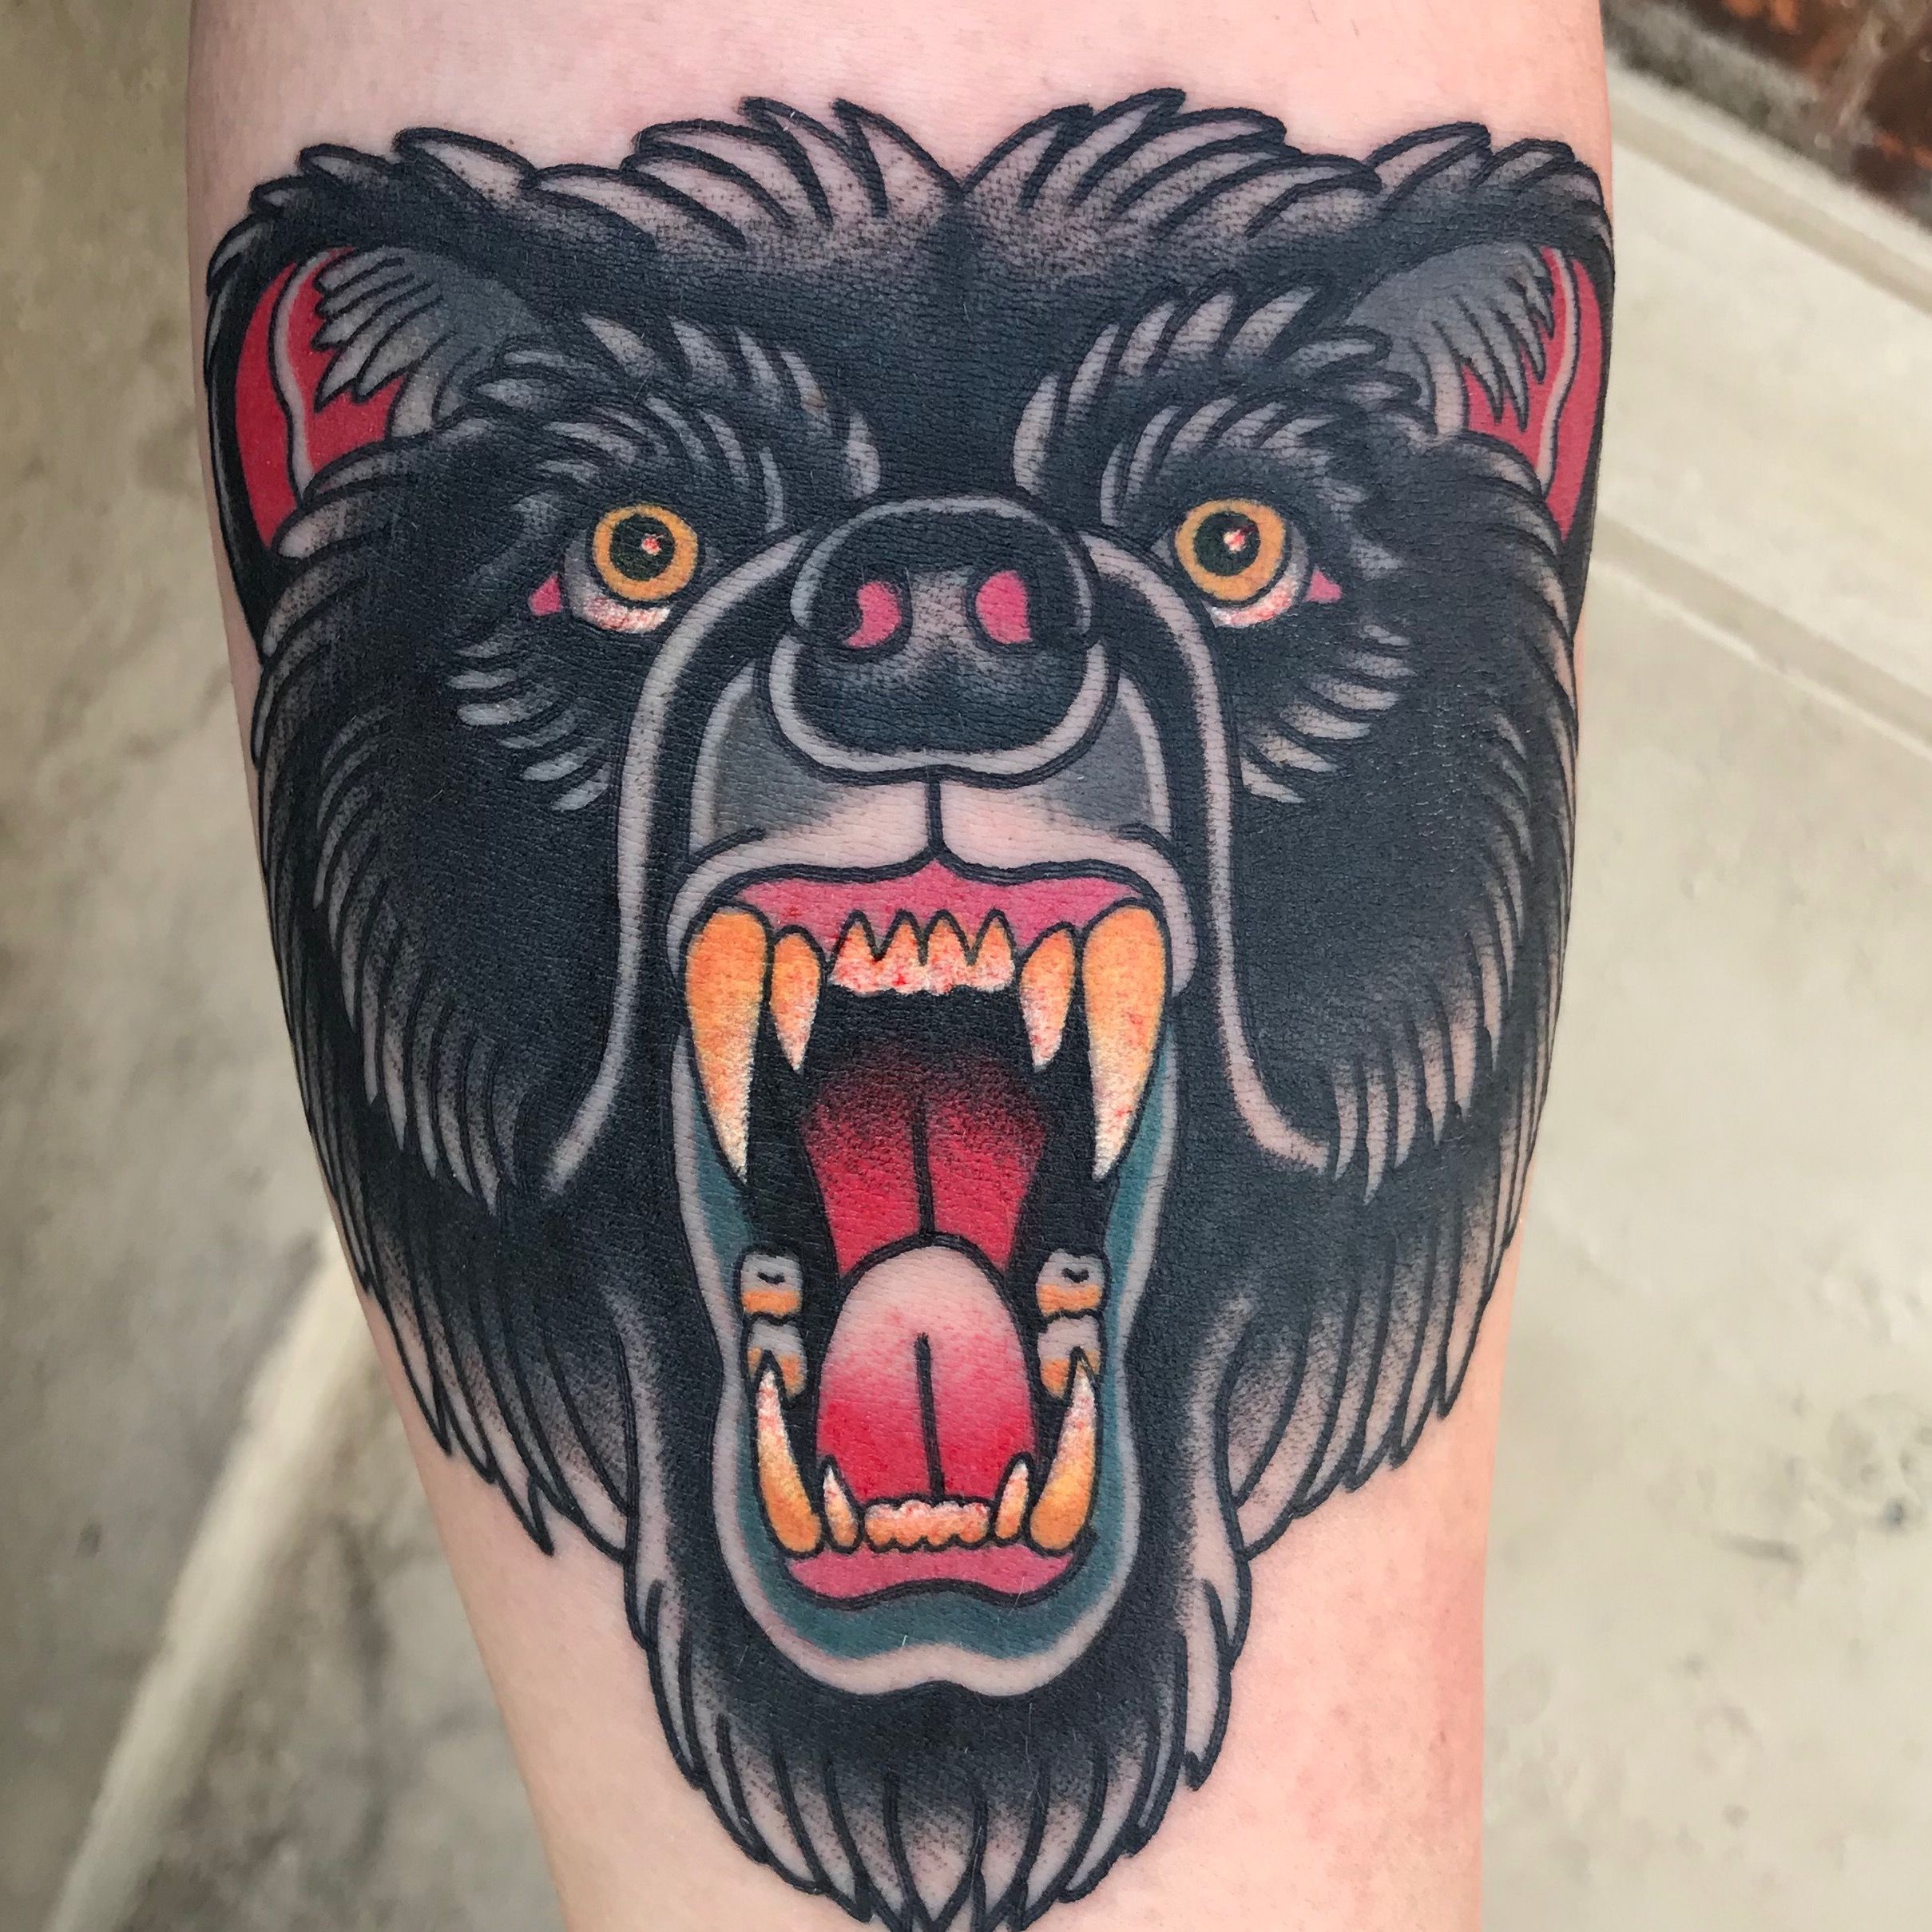 Star Tattoo  Made by Patrick  patrickpowelltattoo Lil bear from a  while back  tattoo tattoos bear traditionaltattoo  Facebook